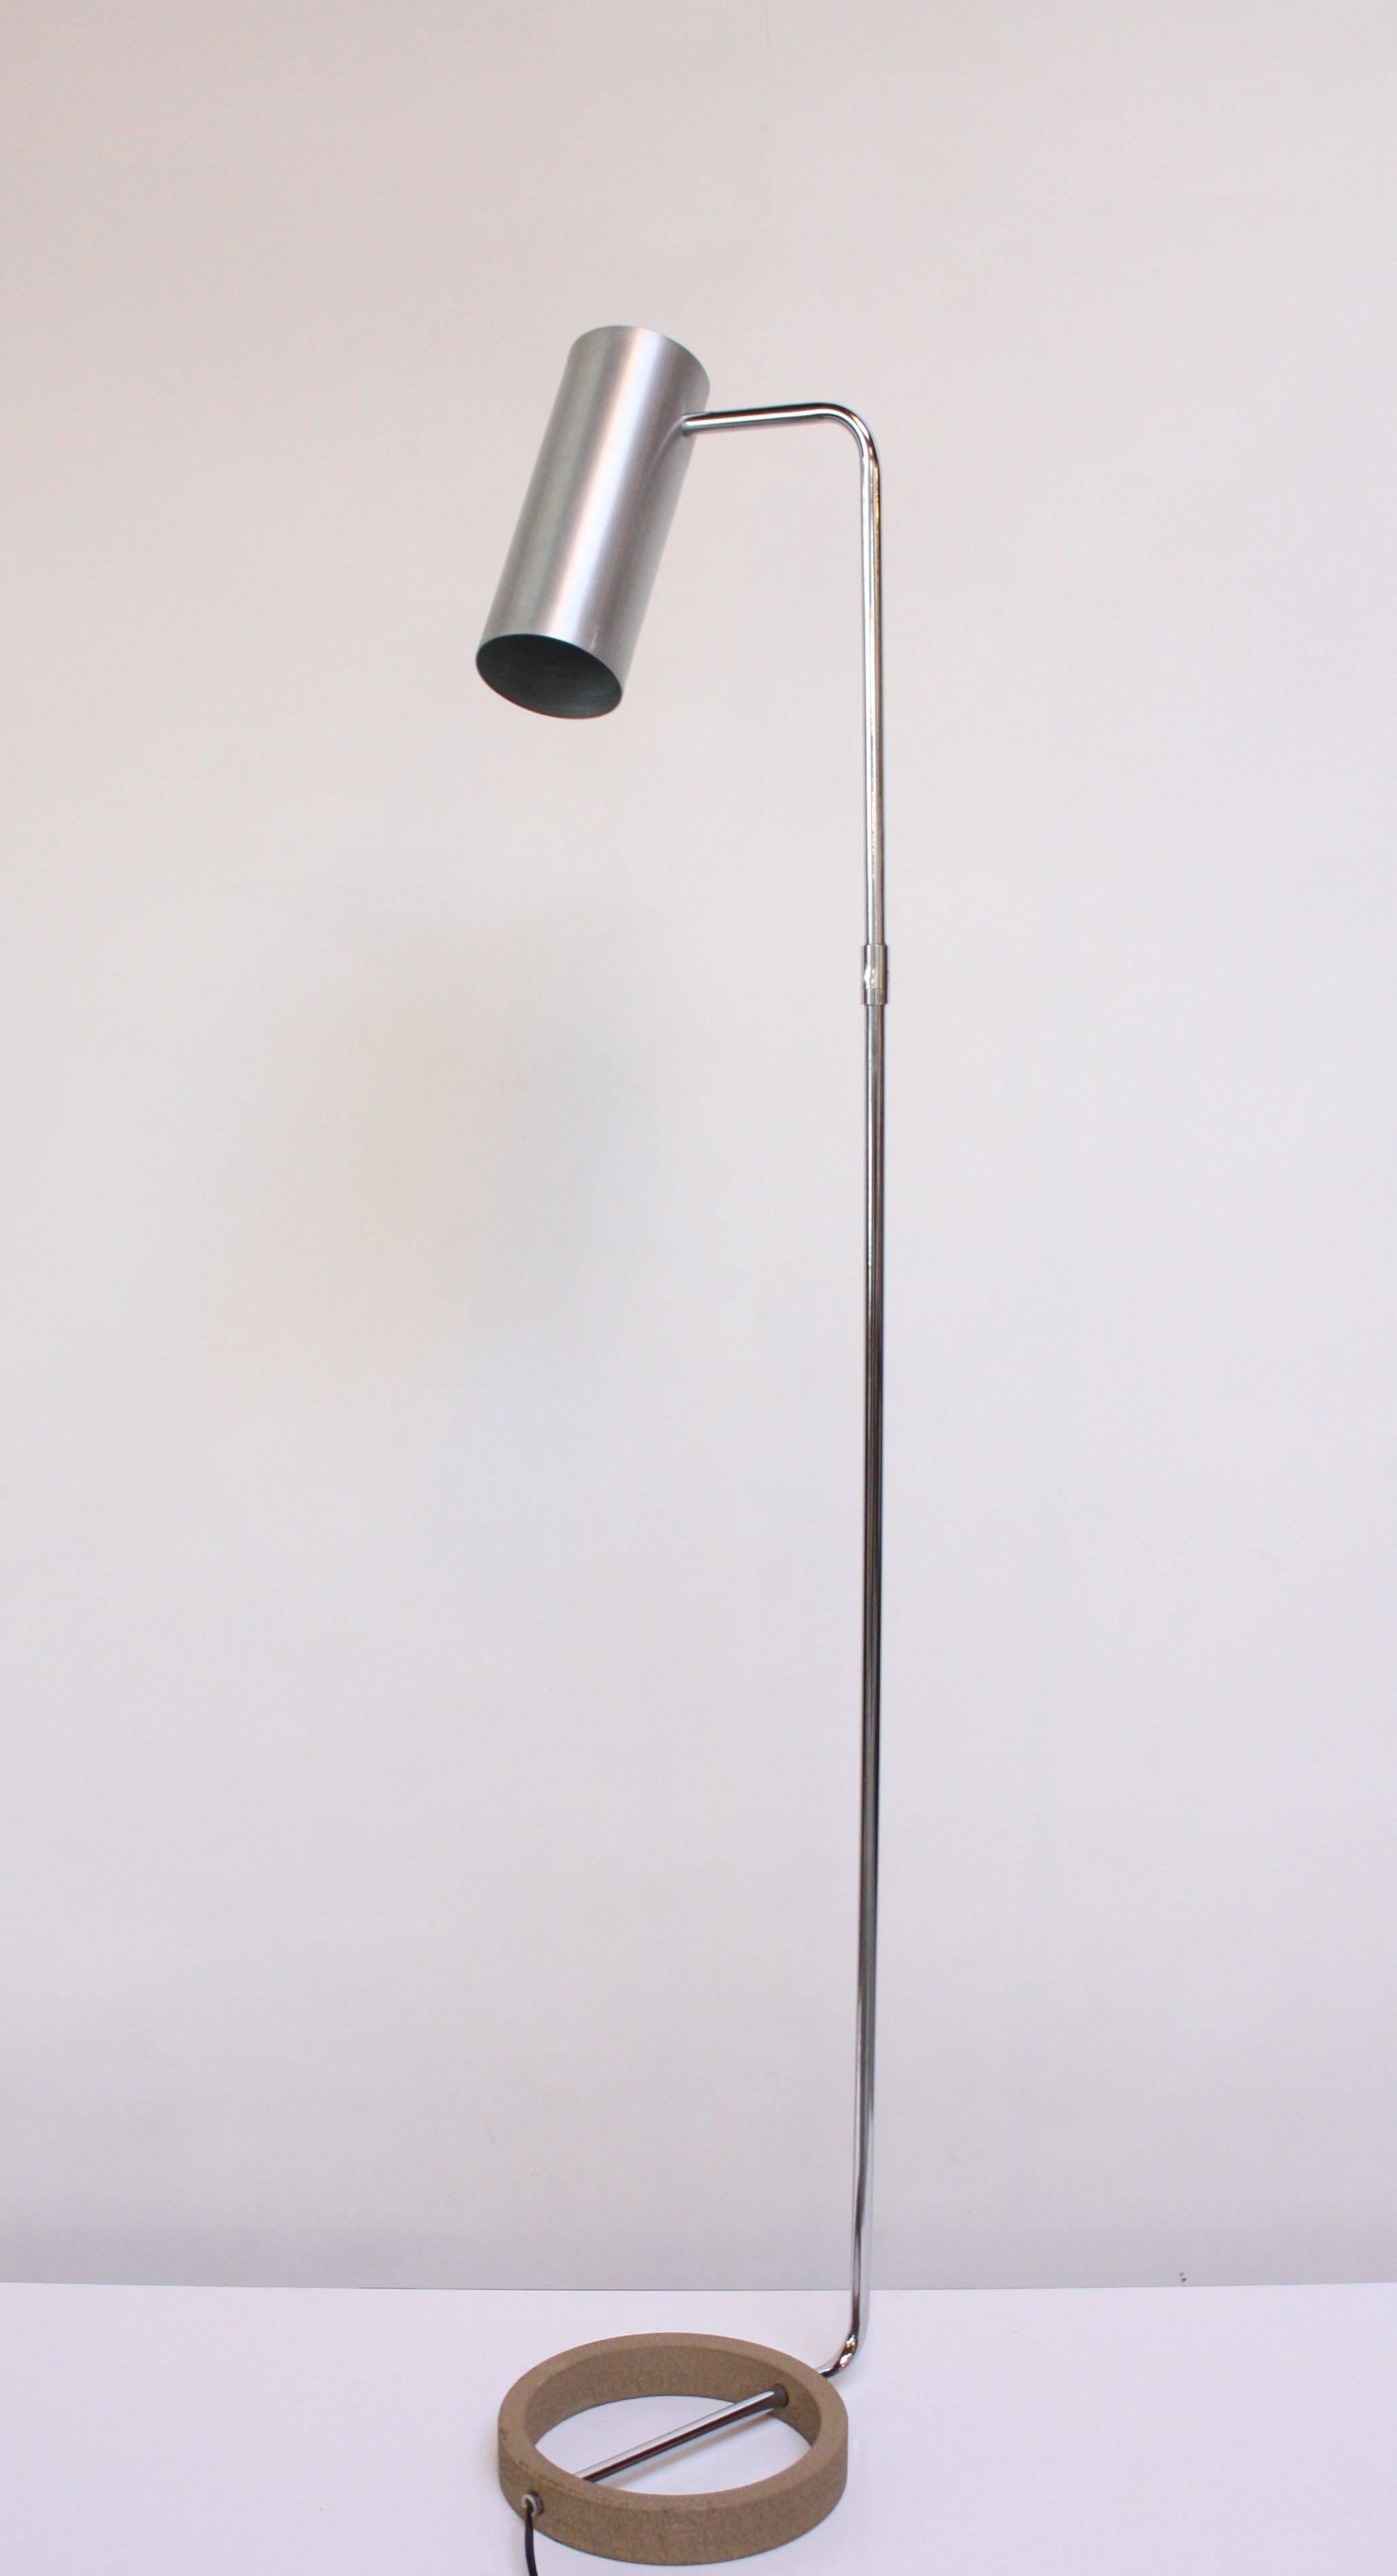 Vintage Paul Mayen for Habitat reading/floor lamp composed of a cylindrical brushed-aluminum shade mounted to a chrome shaft on a round painted steel base. Fixture features three options for adjustment including the fixture itself from left to right